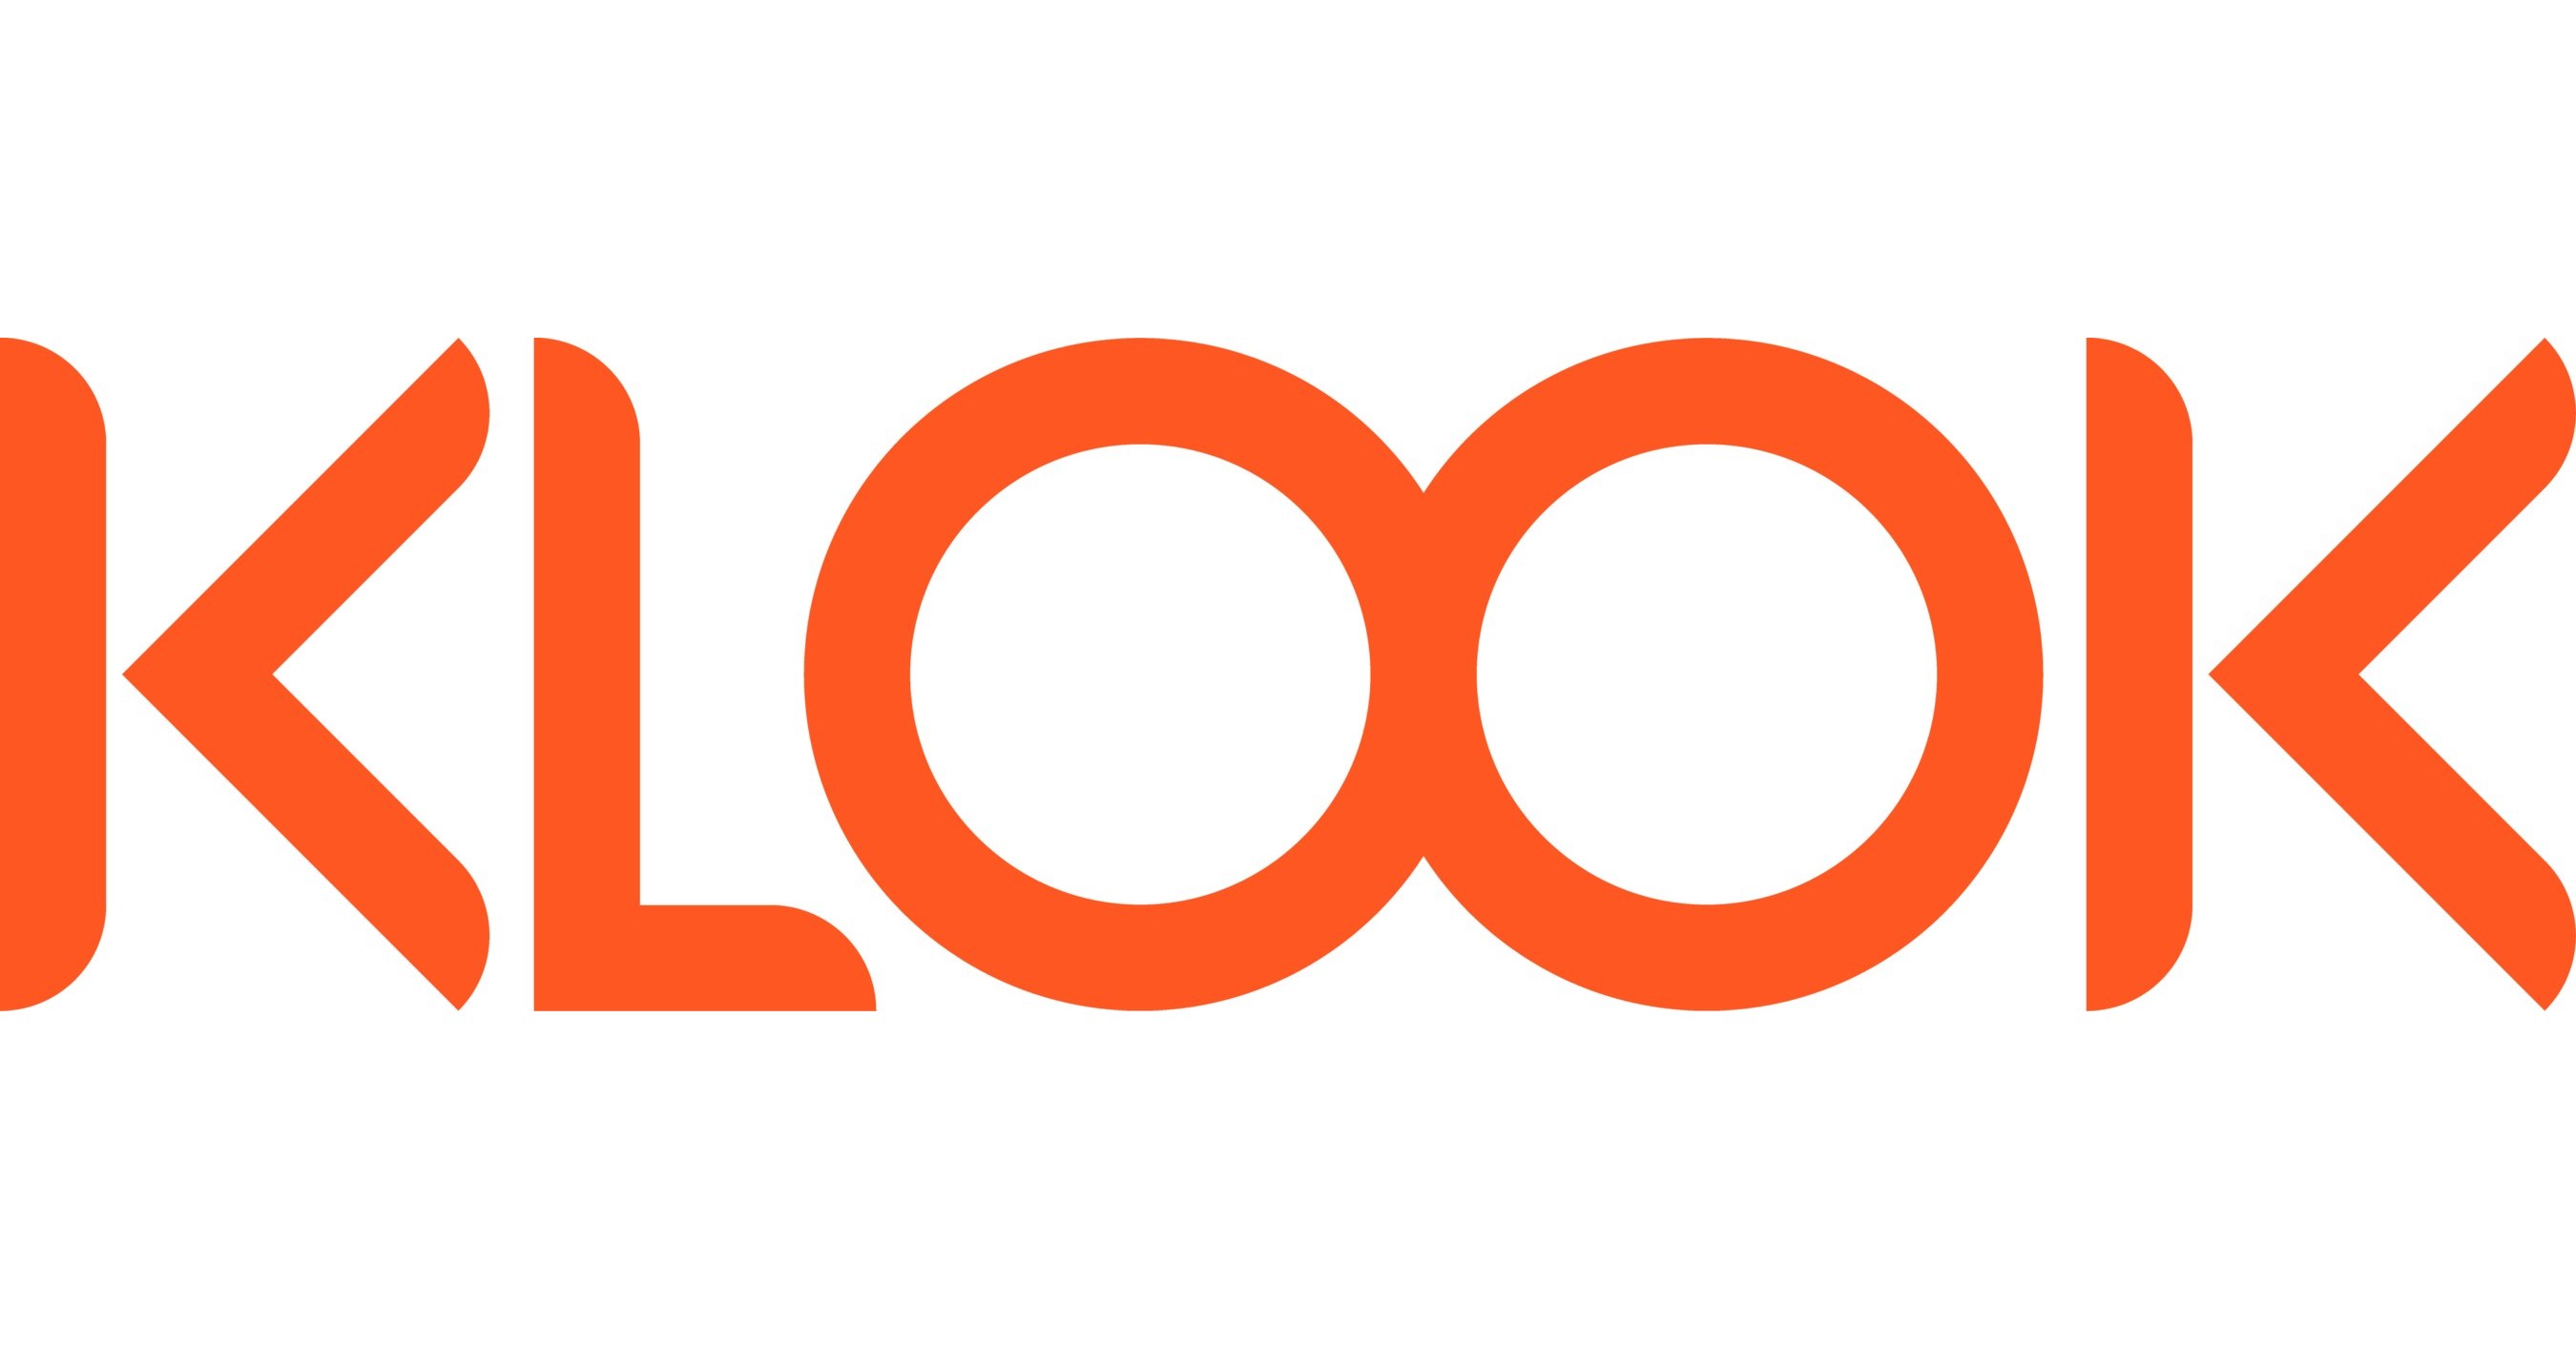 Klook Partners with Redeam to Accelerate Development in the North